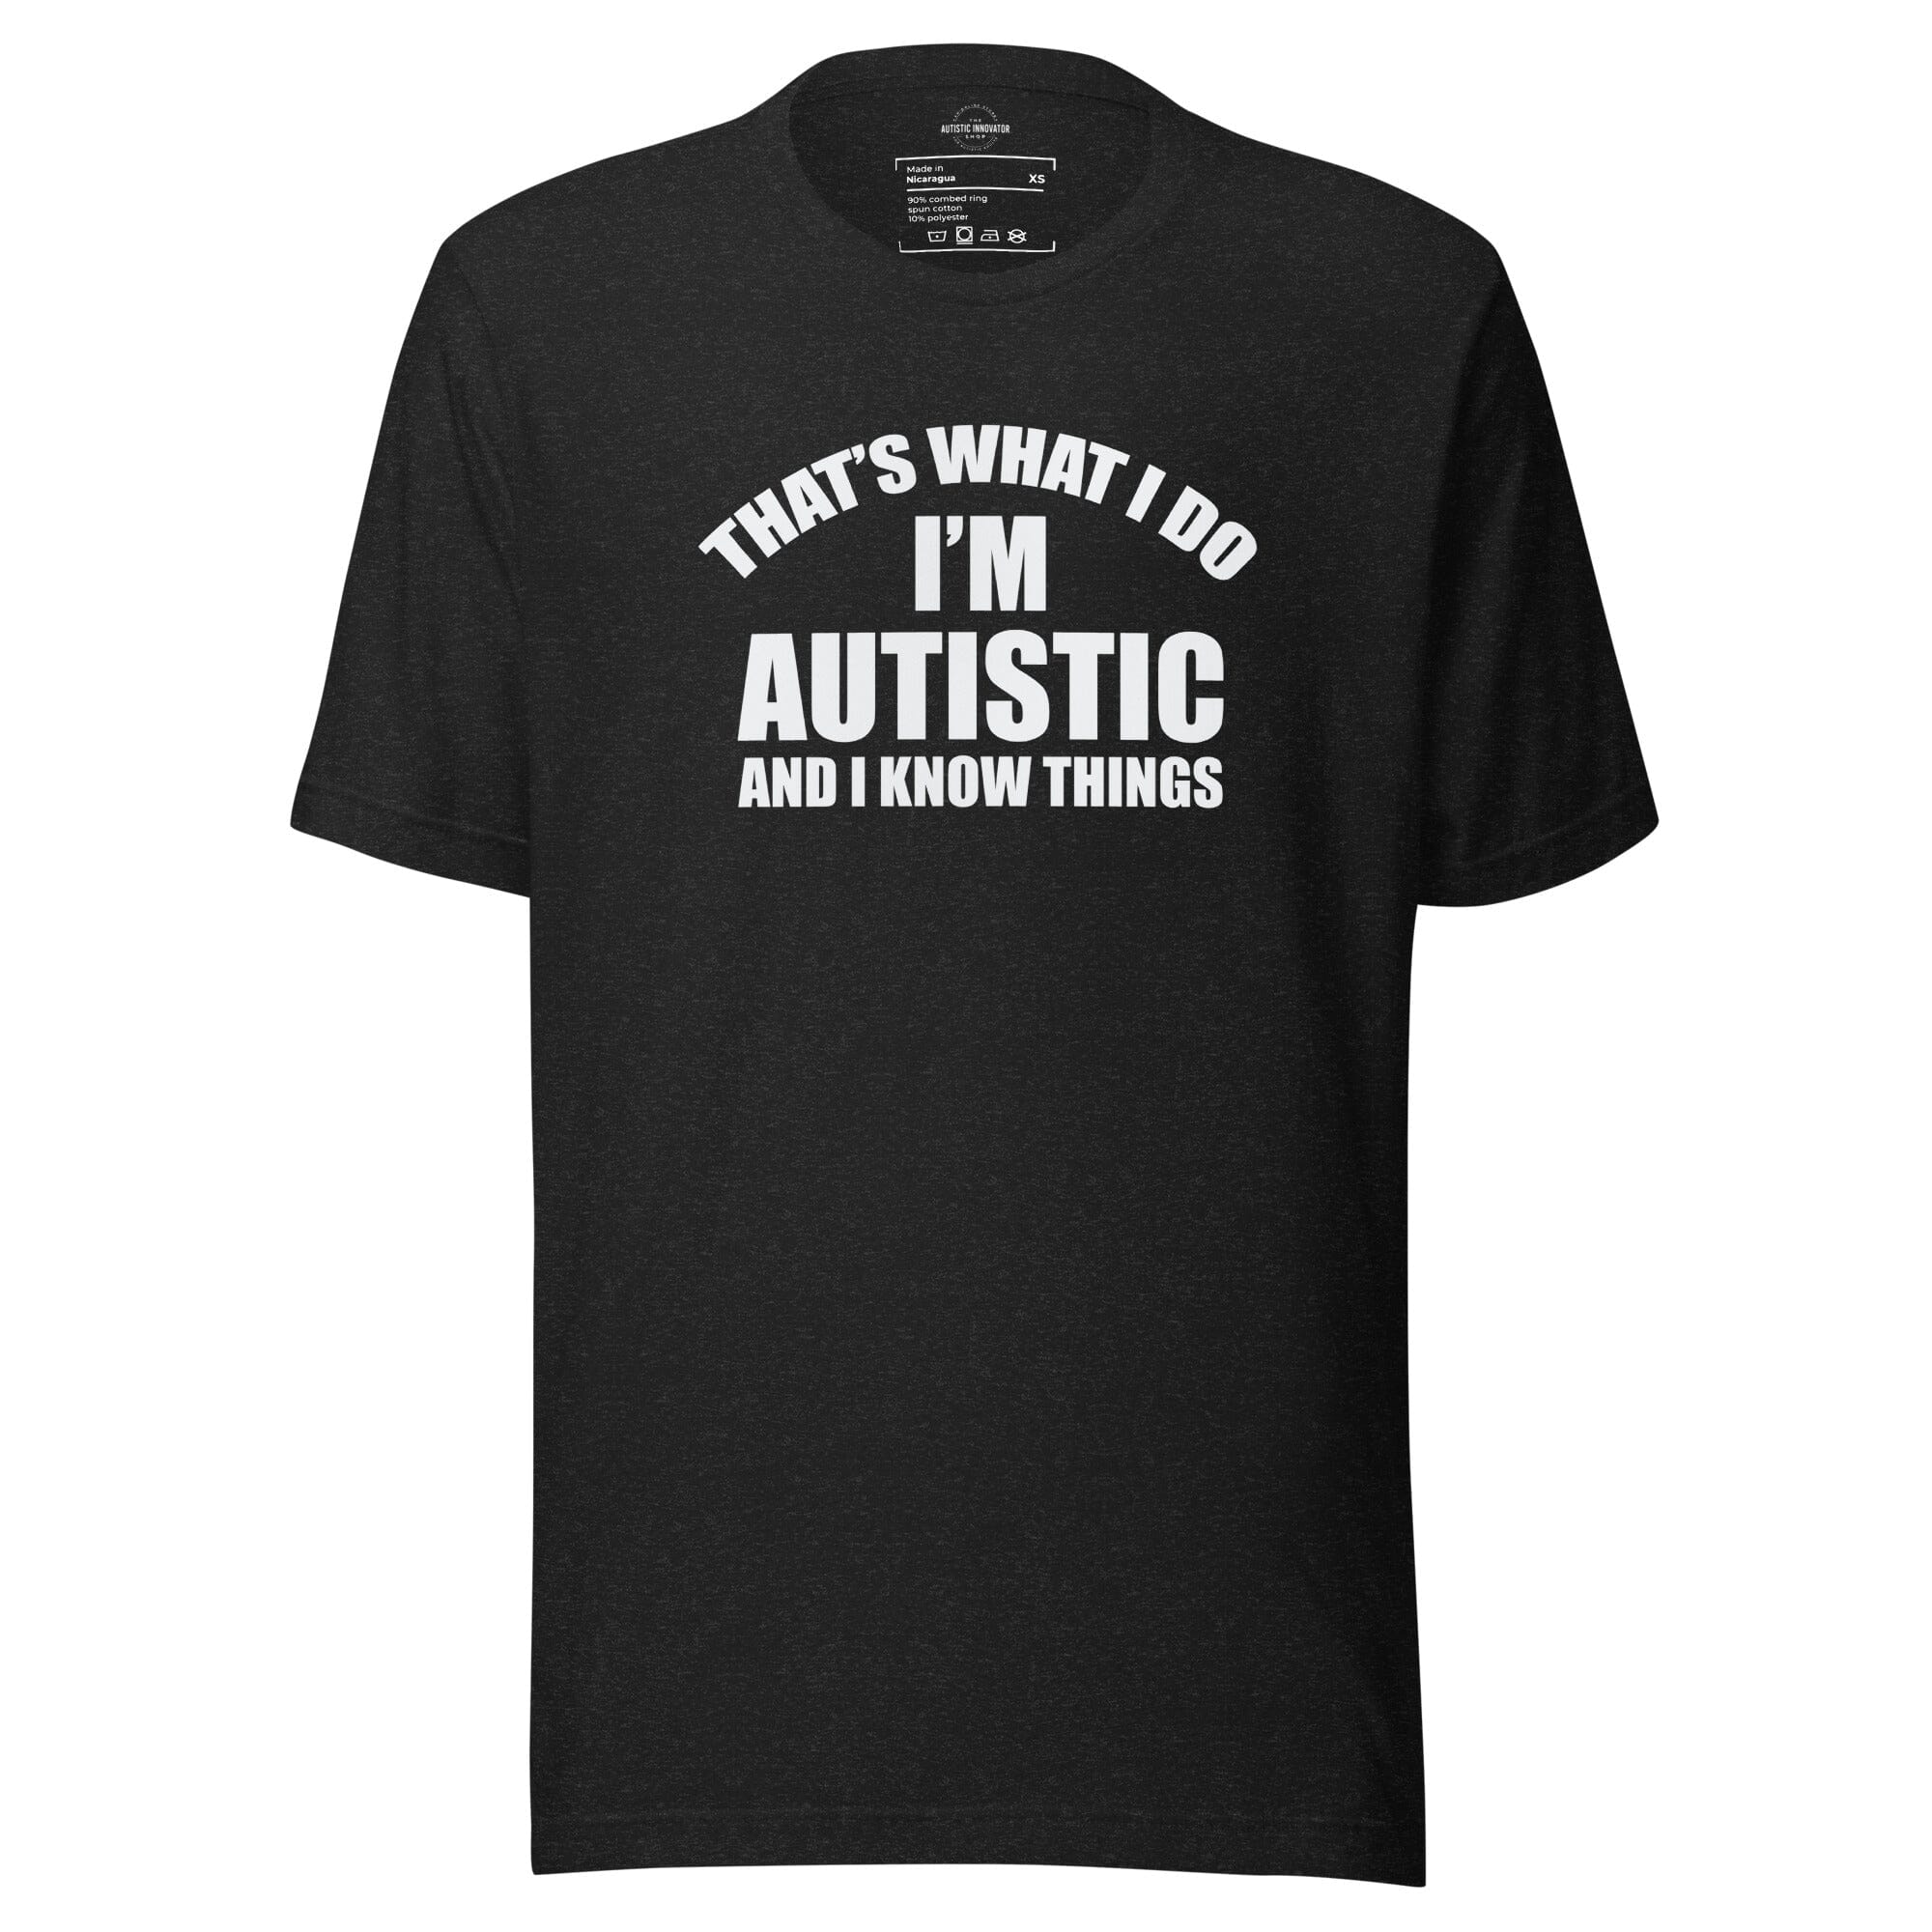 That's What I Do, I'm Autistic and I Know Things Unisex t-shirt The Autistic Innovator Black Heather XS 